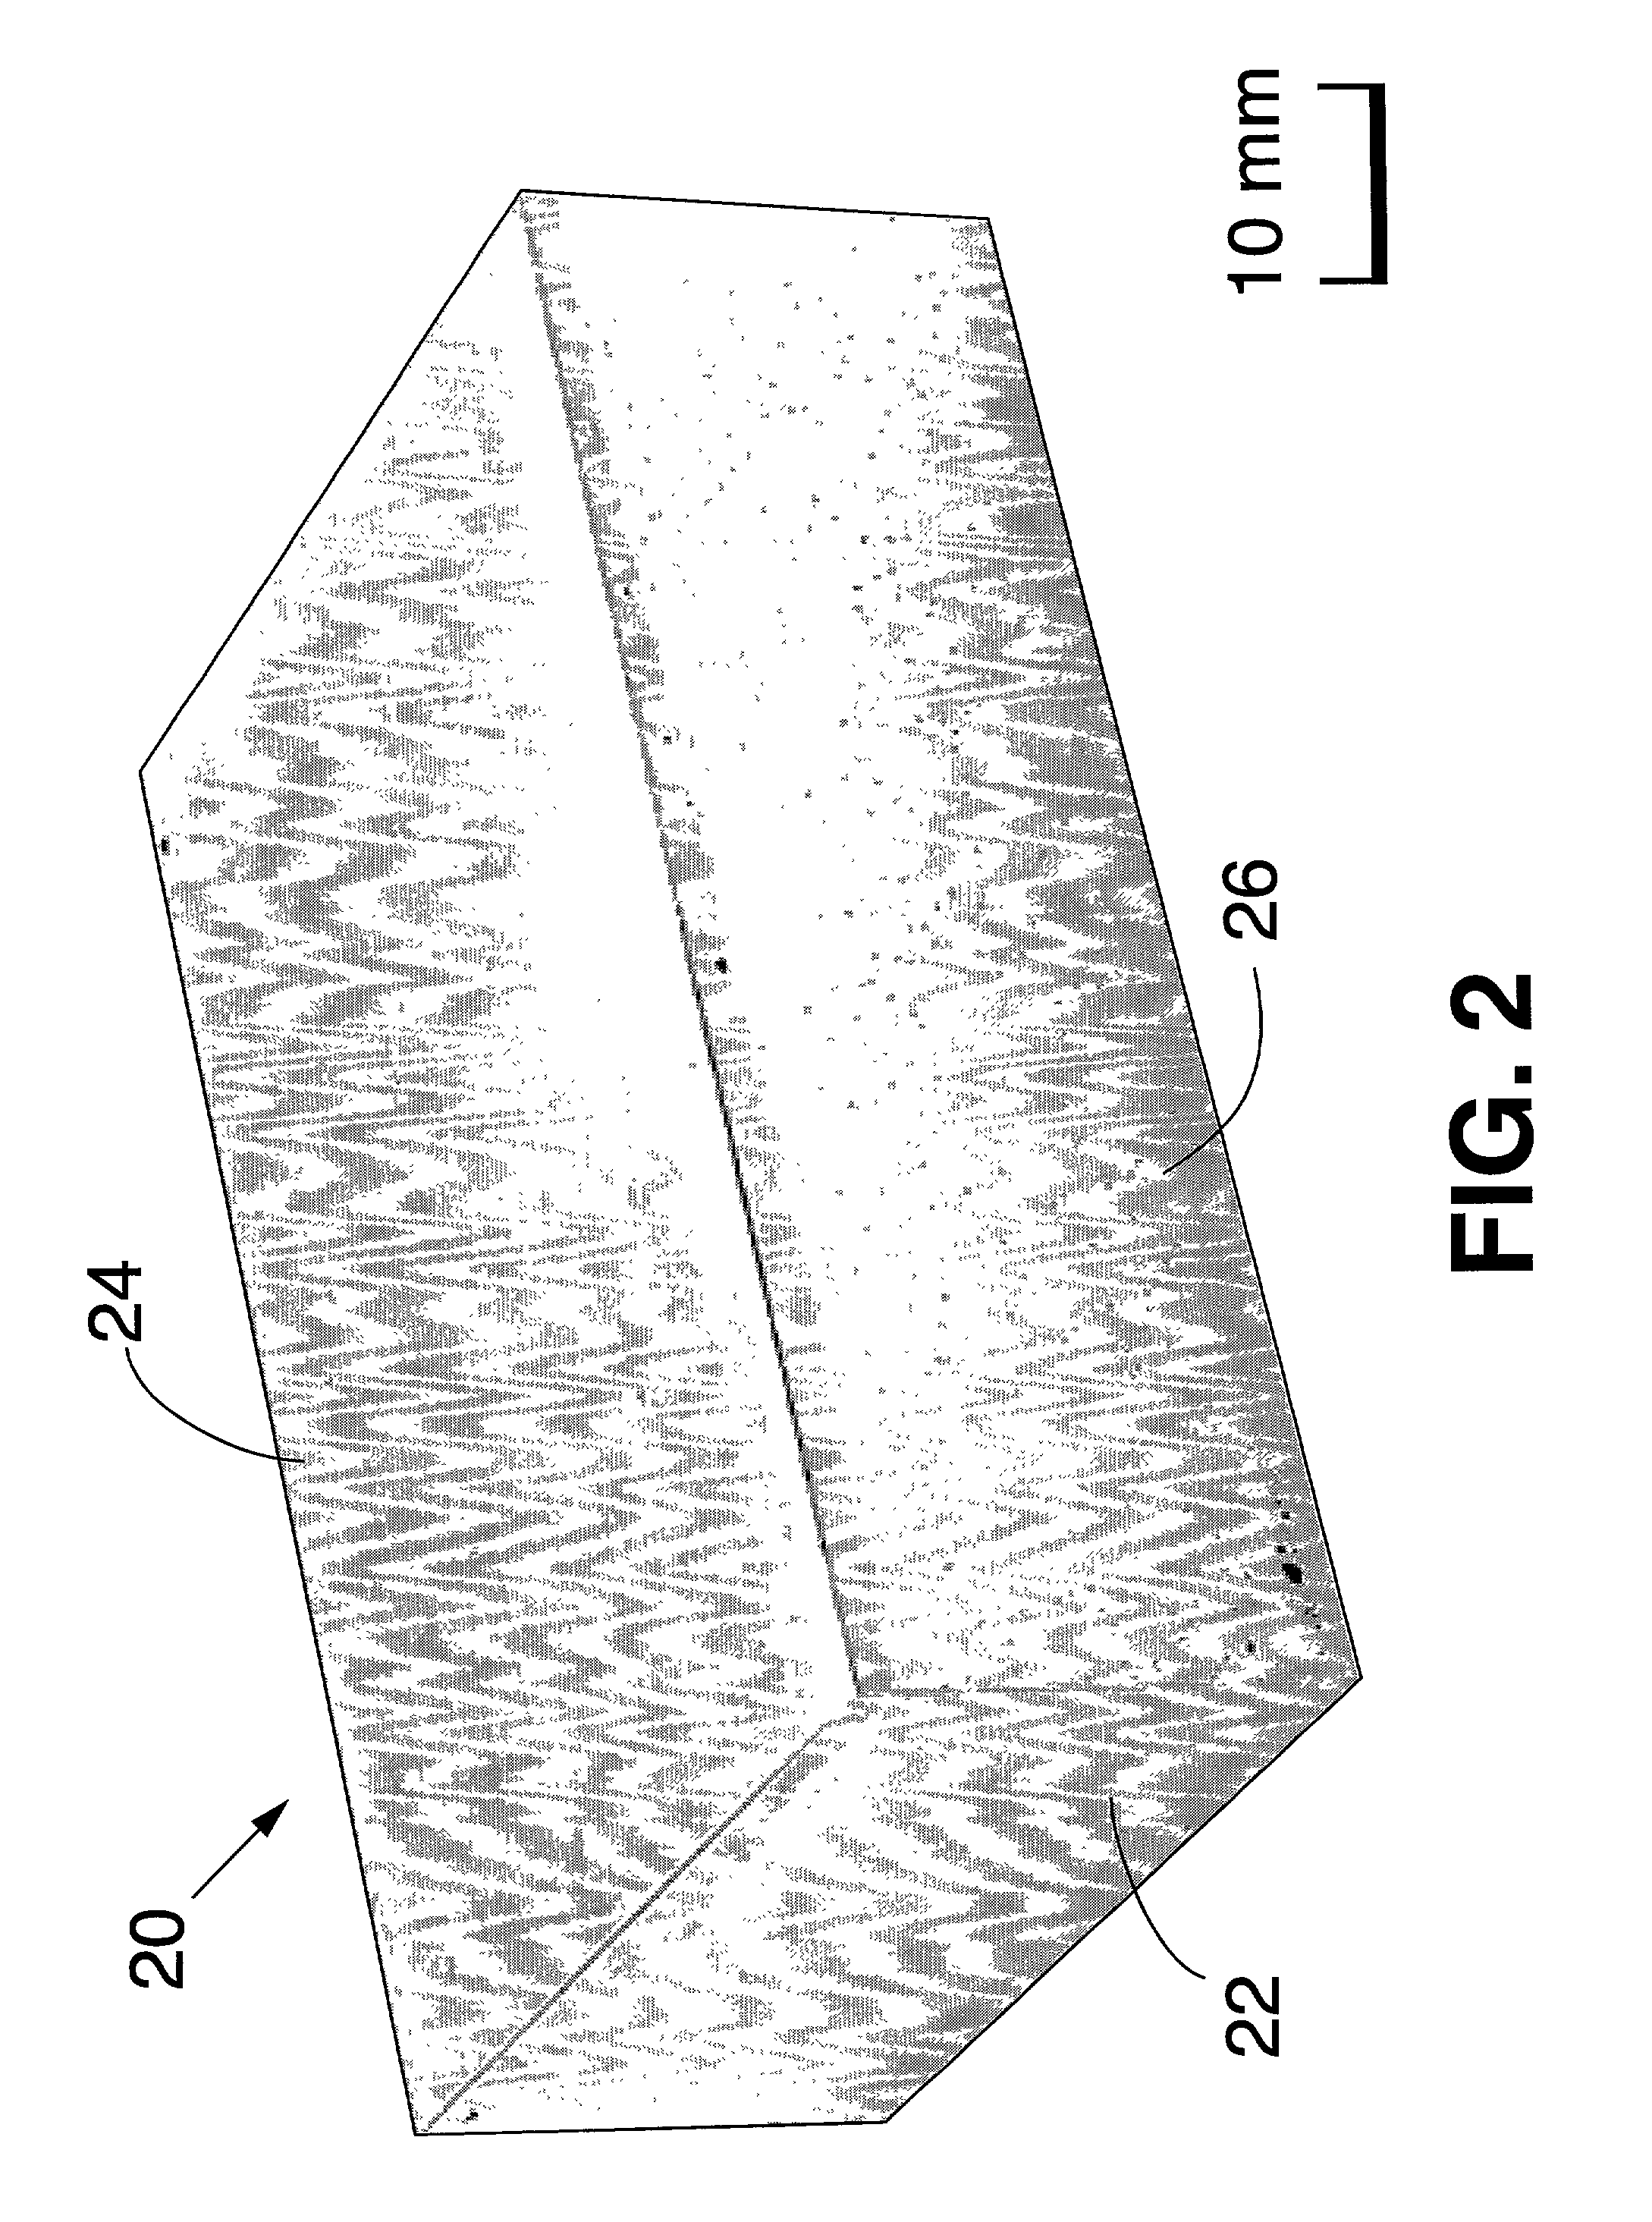 Aluminum alloys having improved surface properties and method of making same